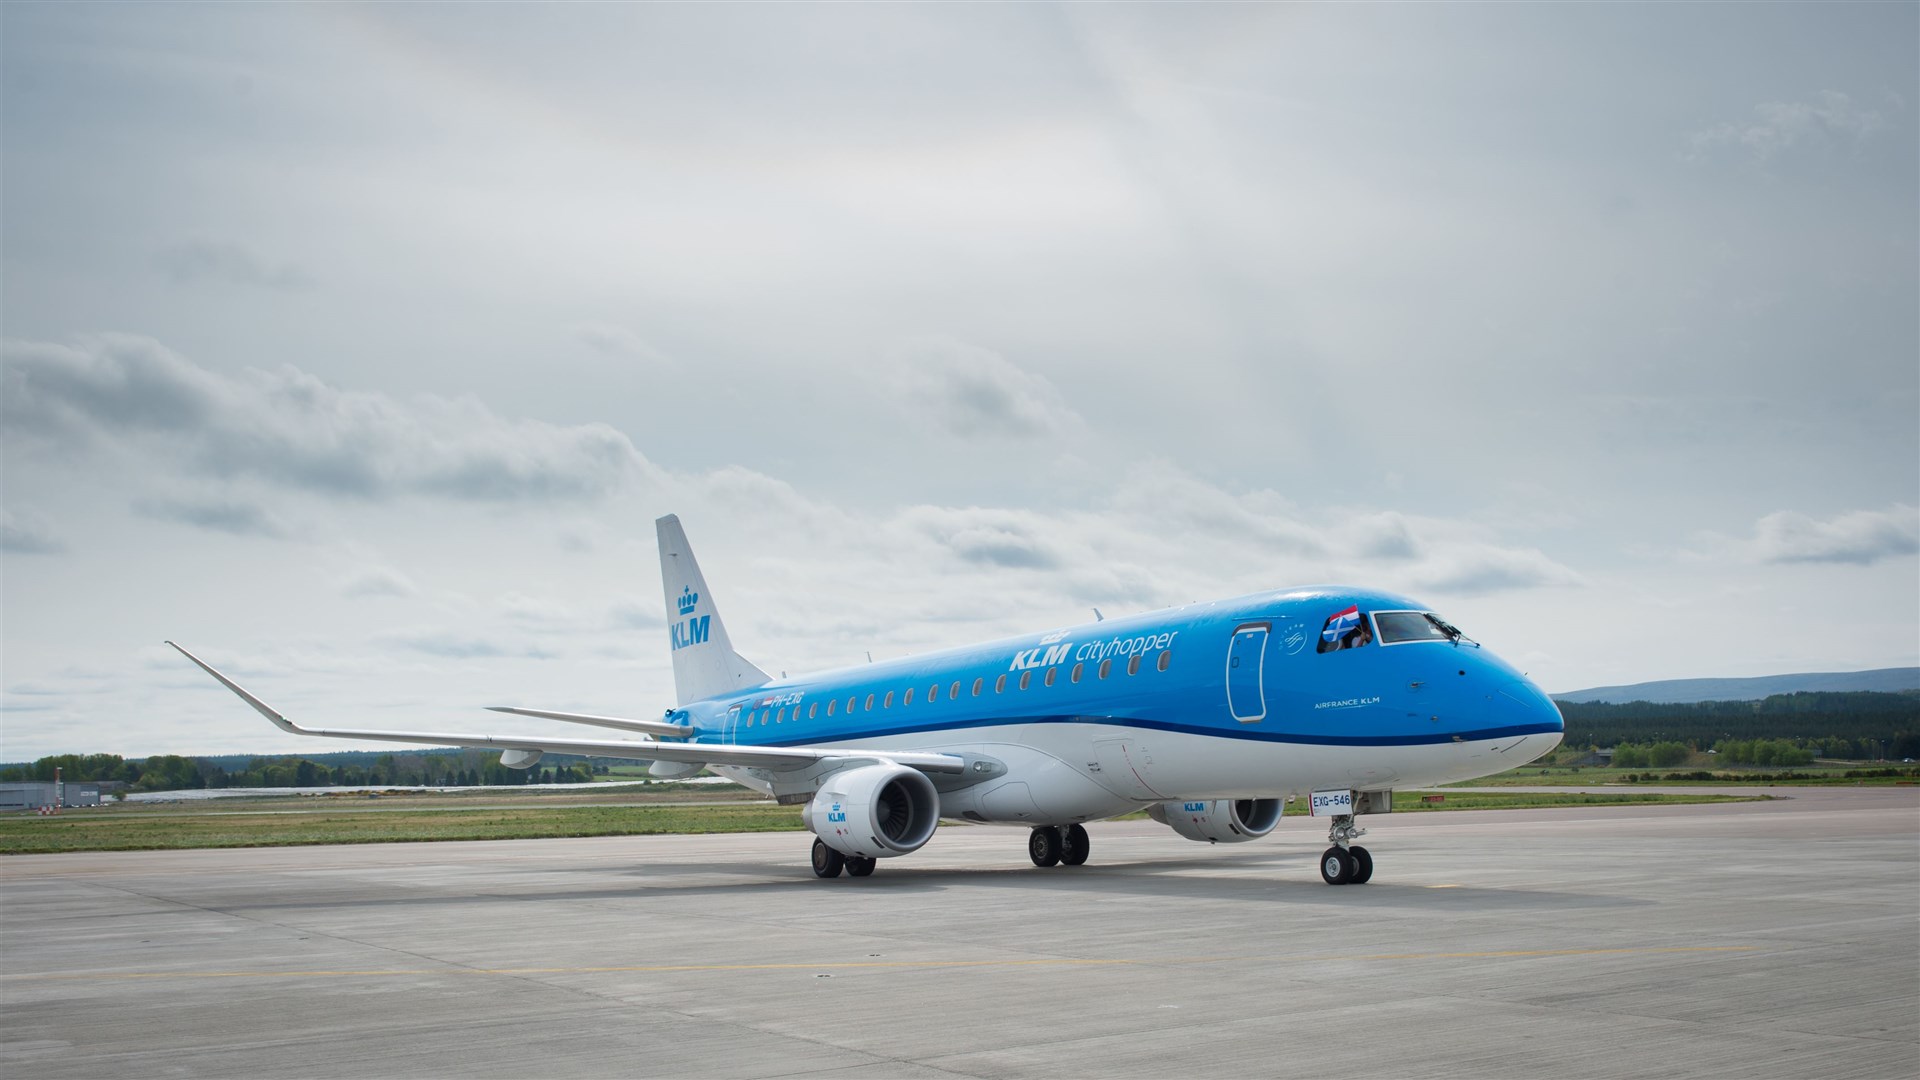 KLM announced they will be increasing their daily flights from Inverness.